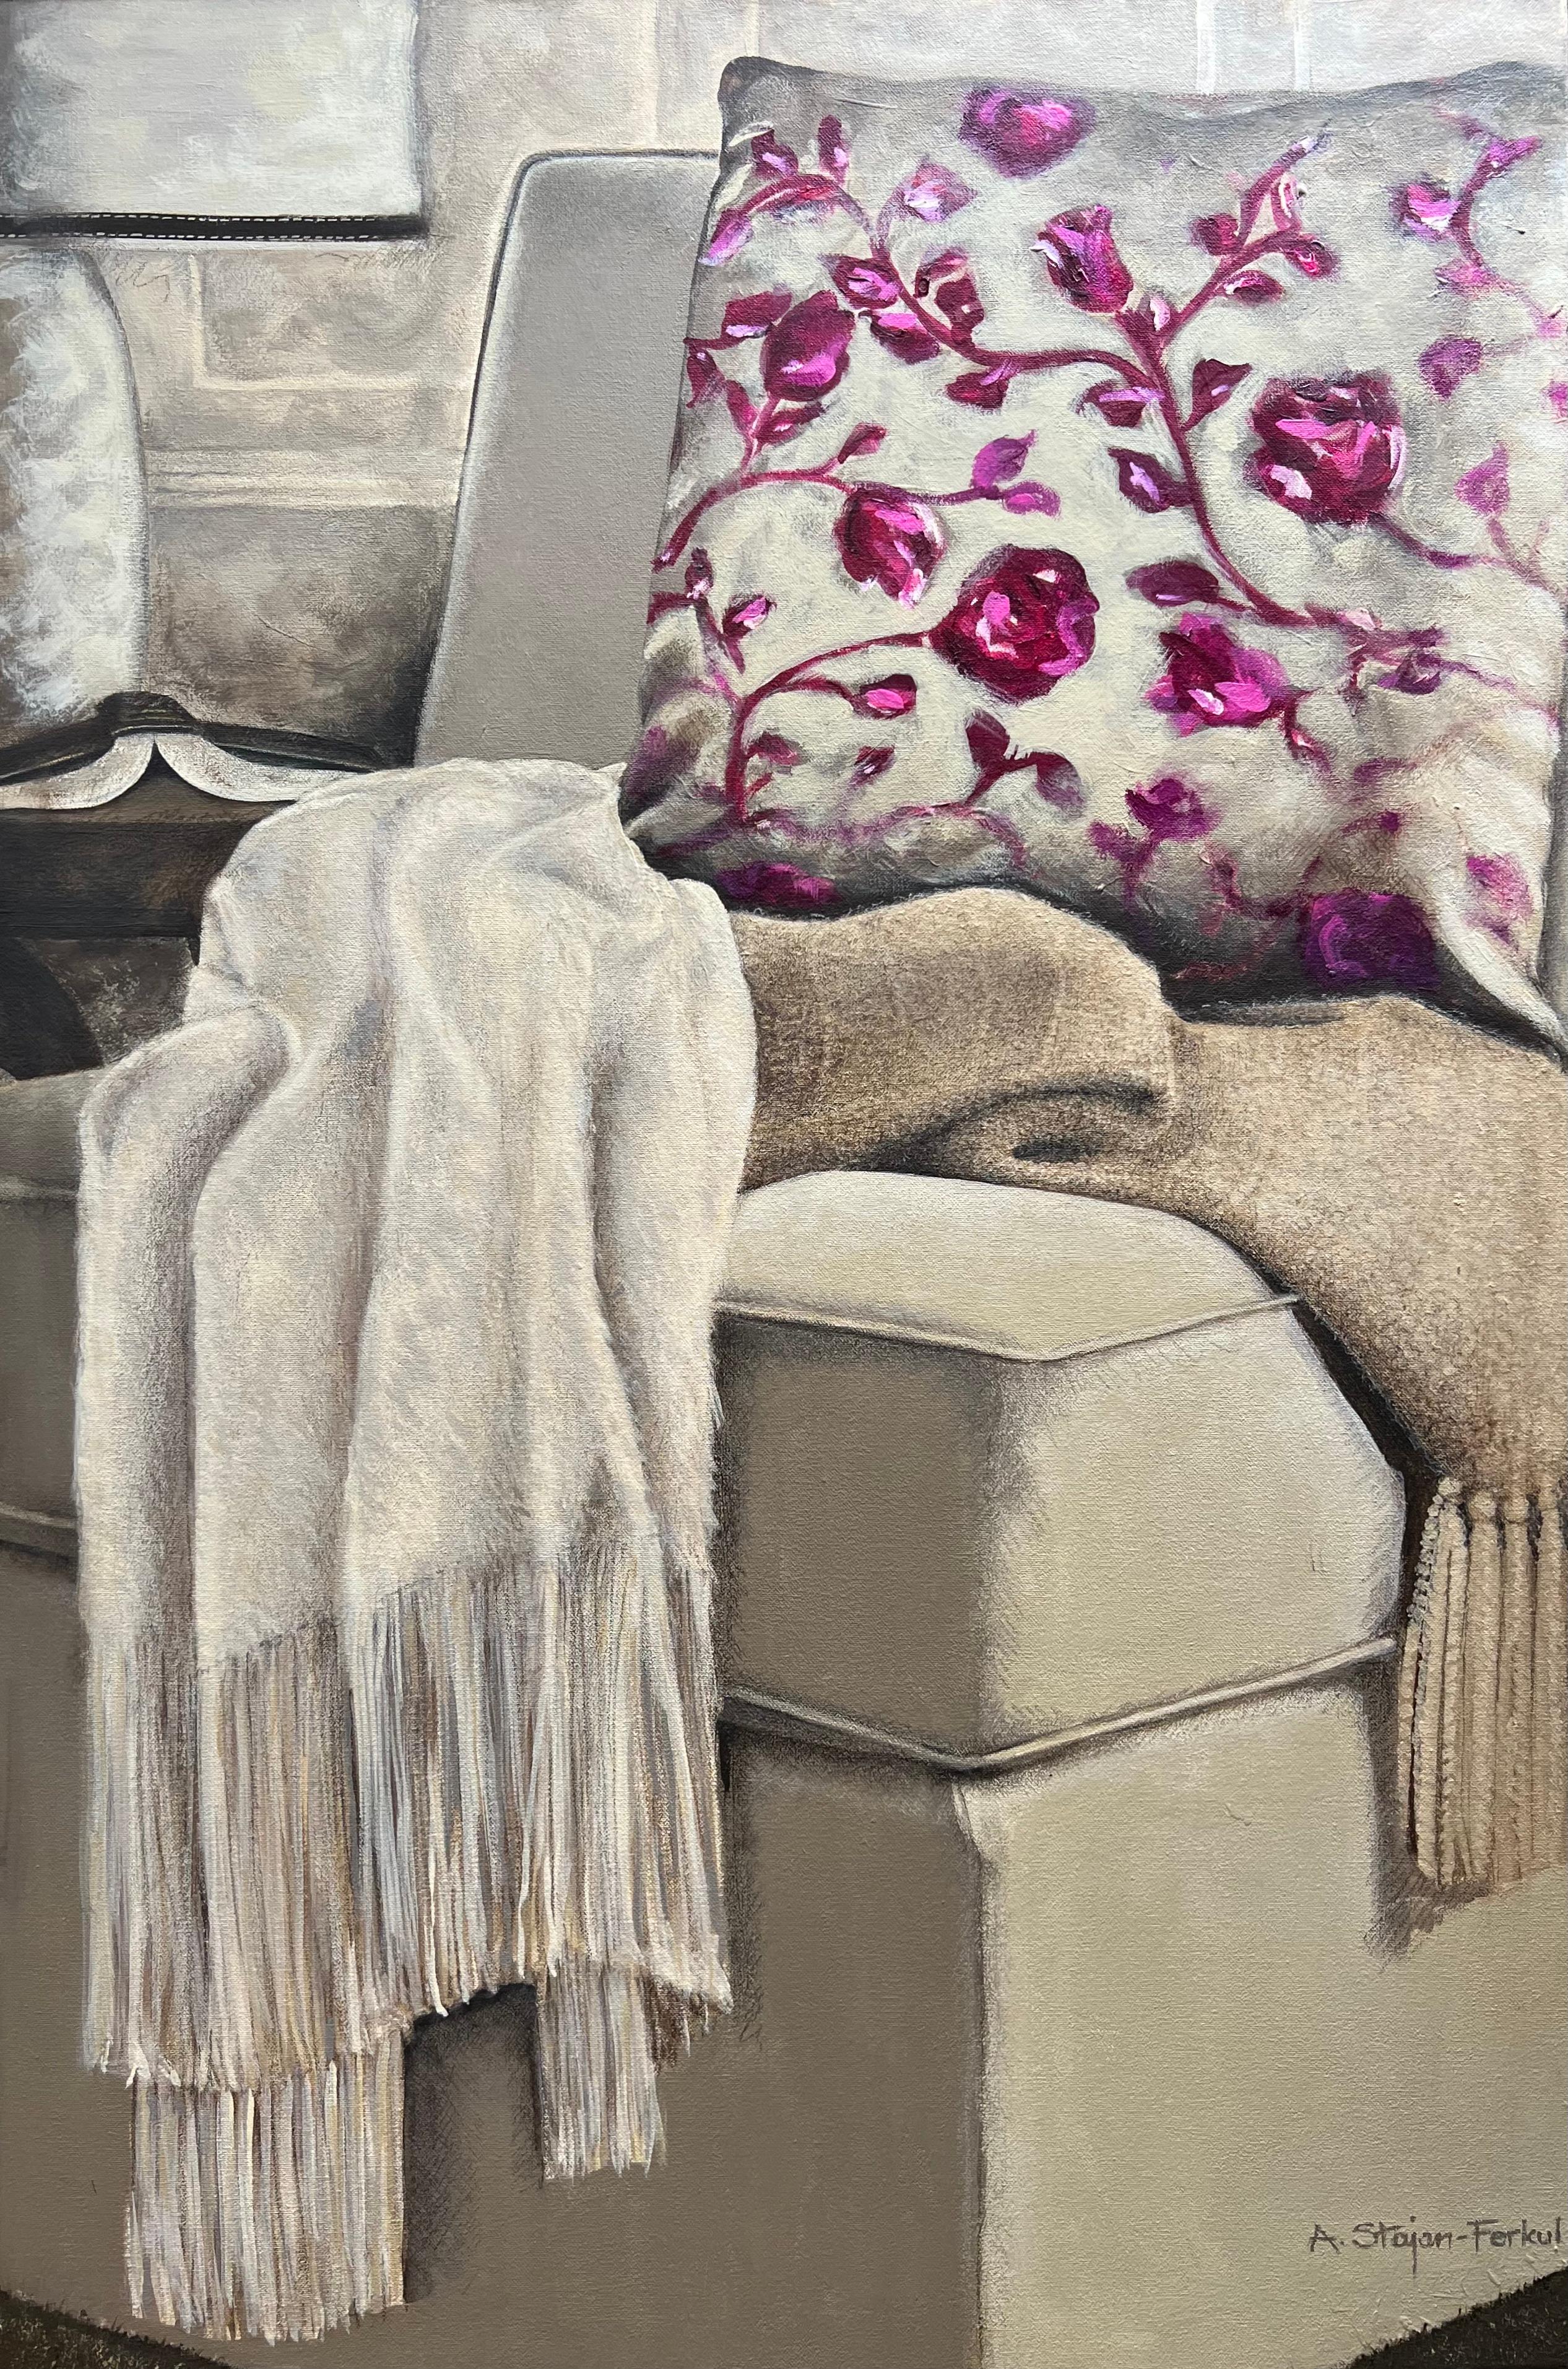 Quiet Time - 24"x36", Interior Still-Life Painting, Pink, Beige, Pillow, Chair